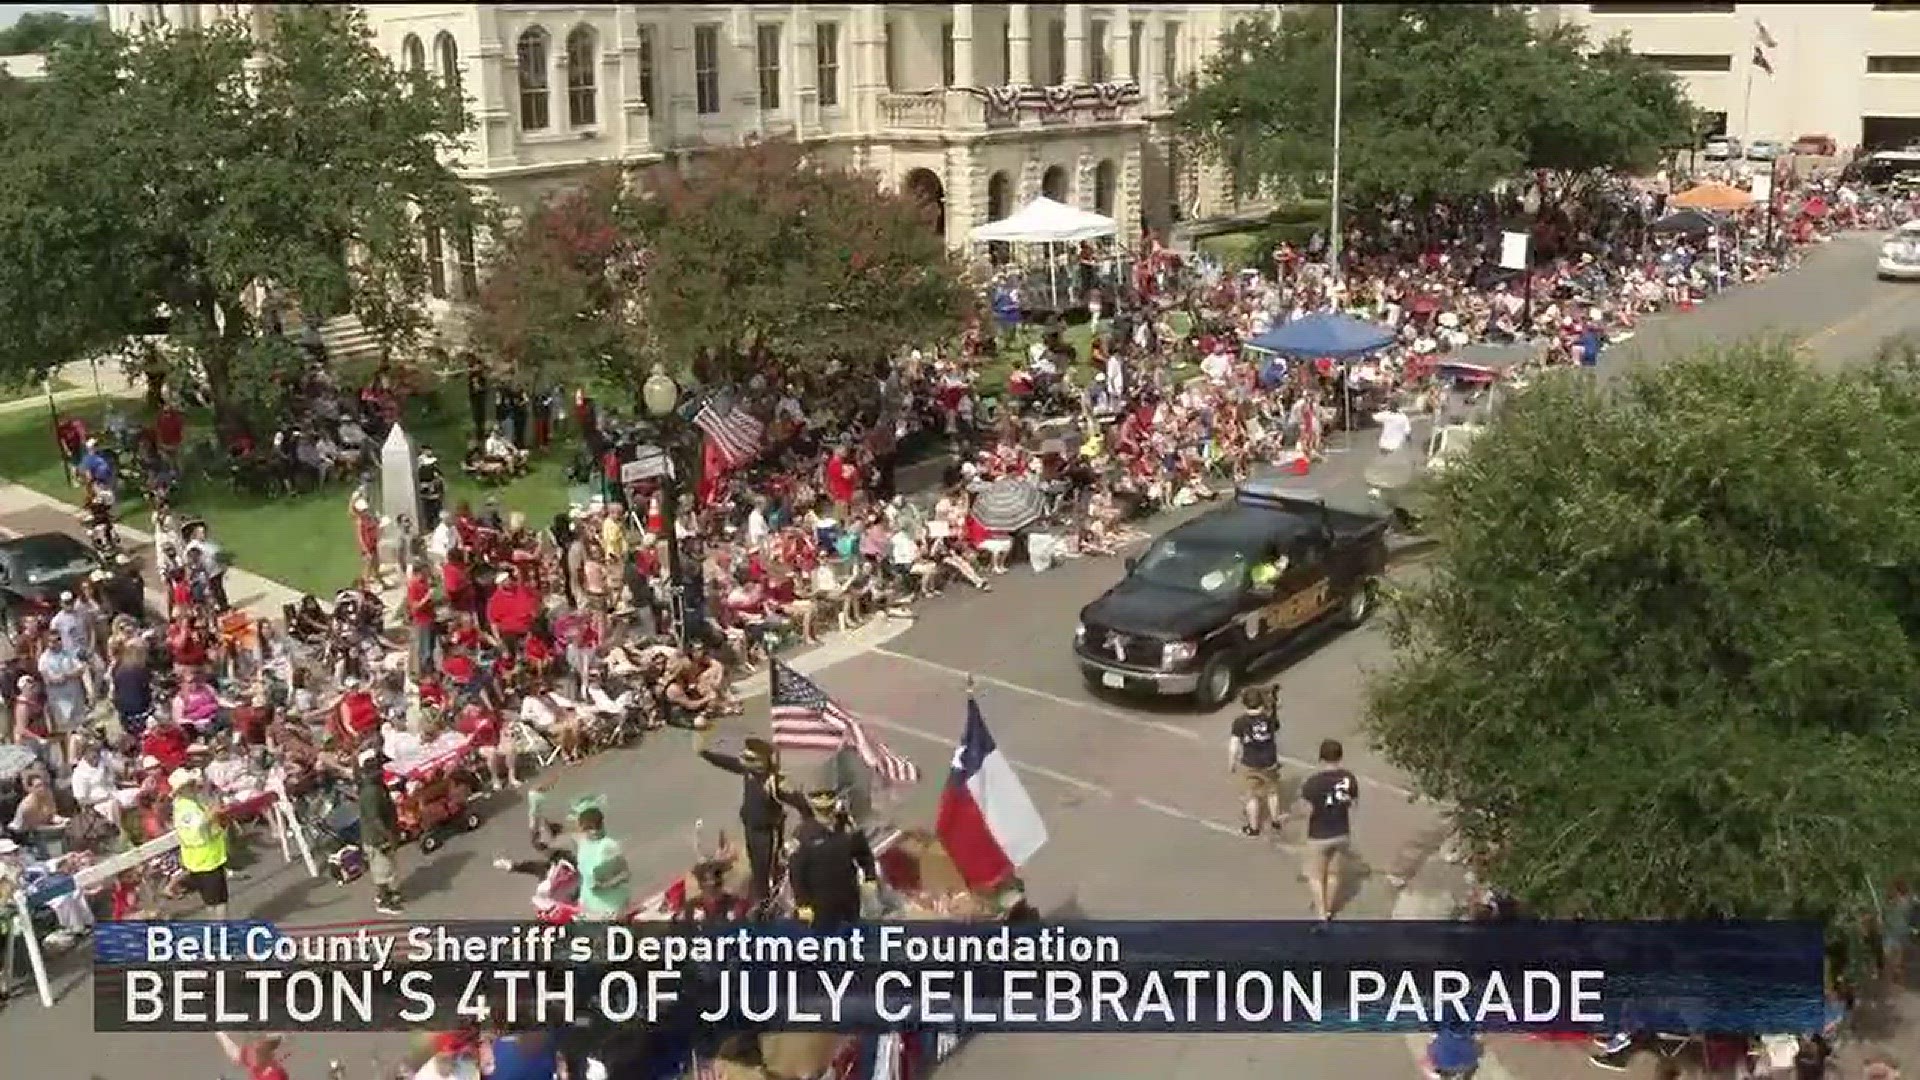 Belton 4th of July Parade in pictures